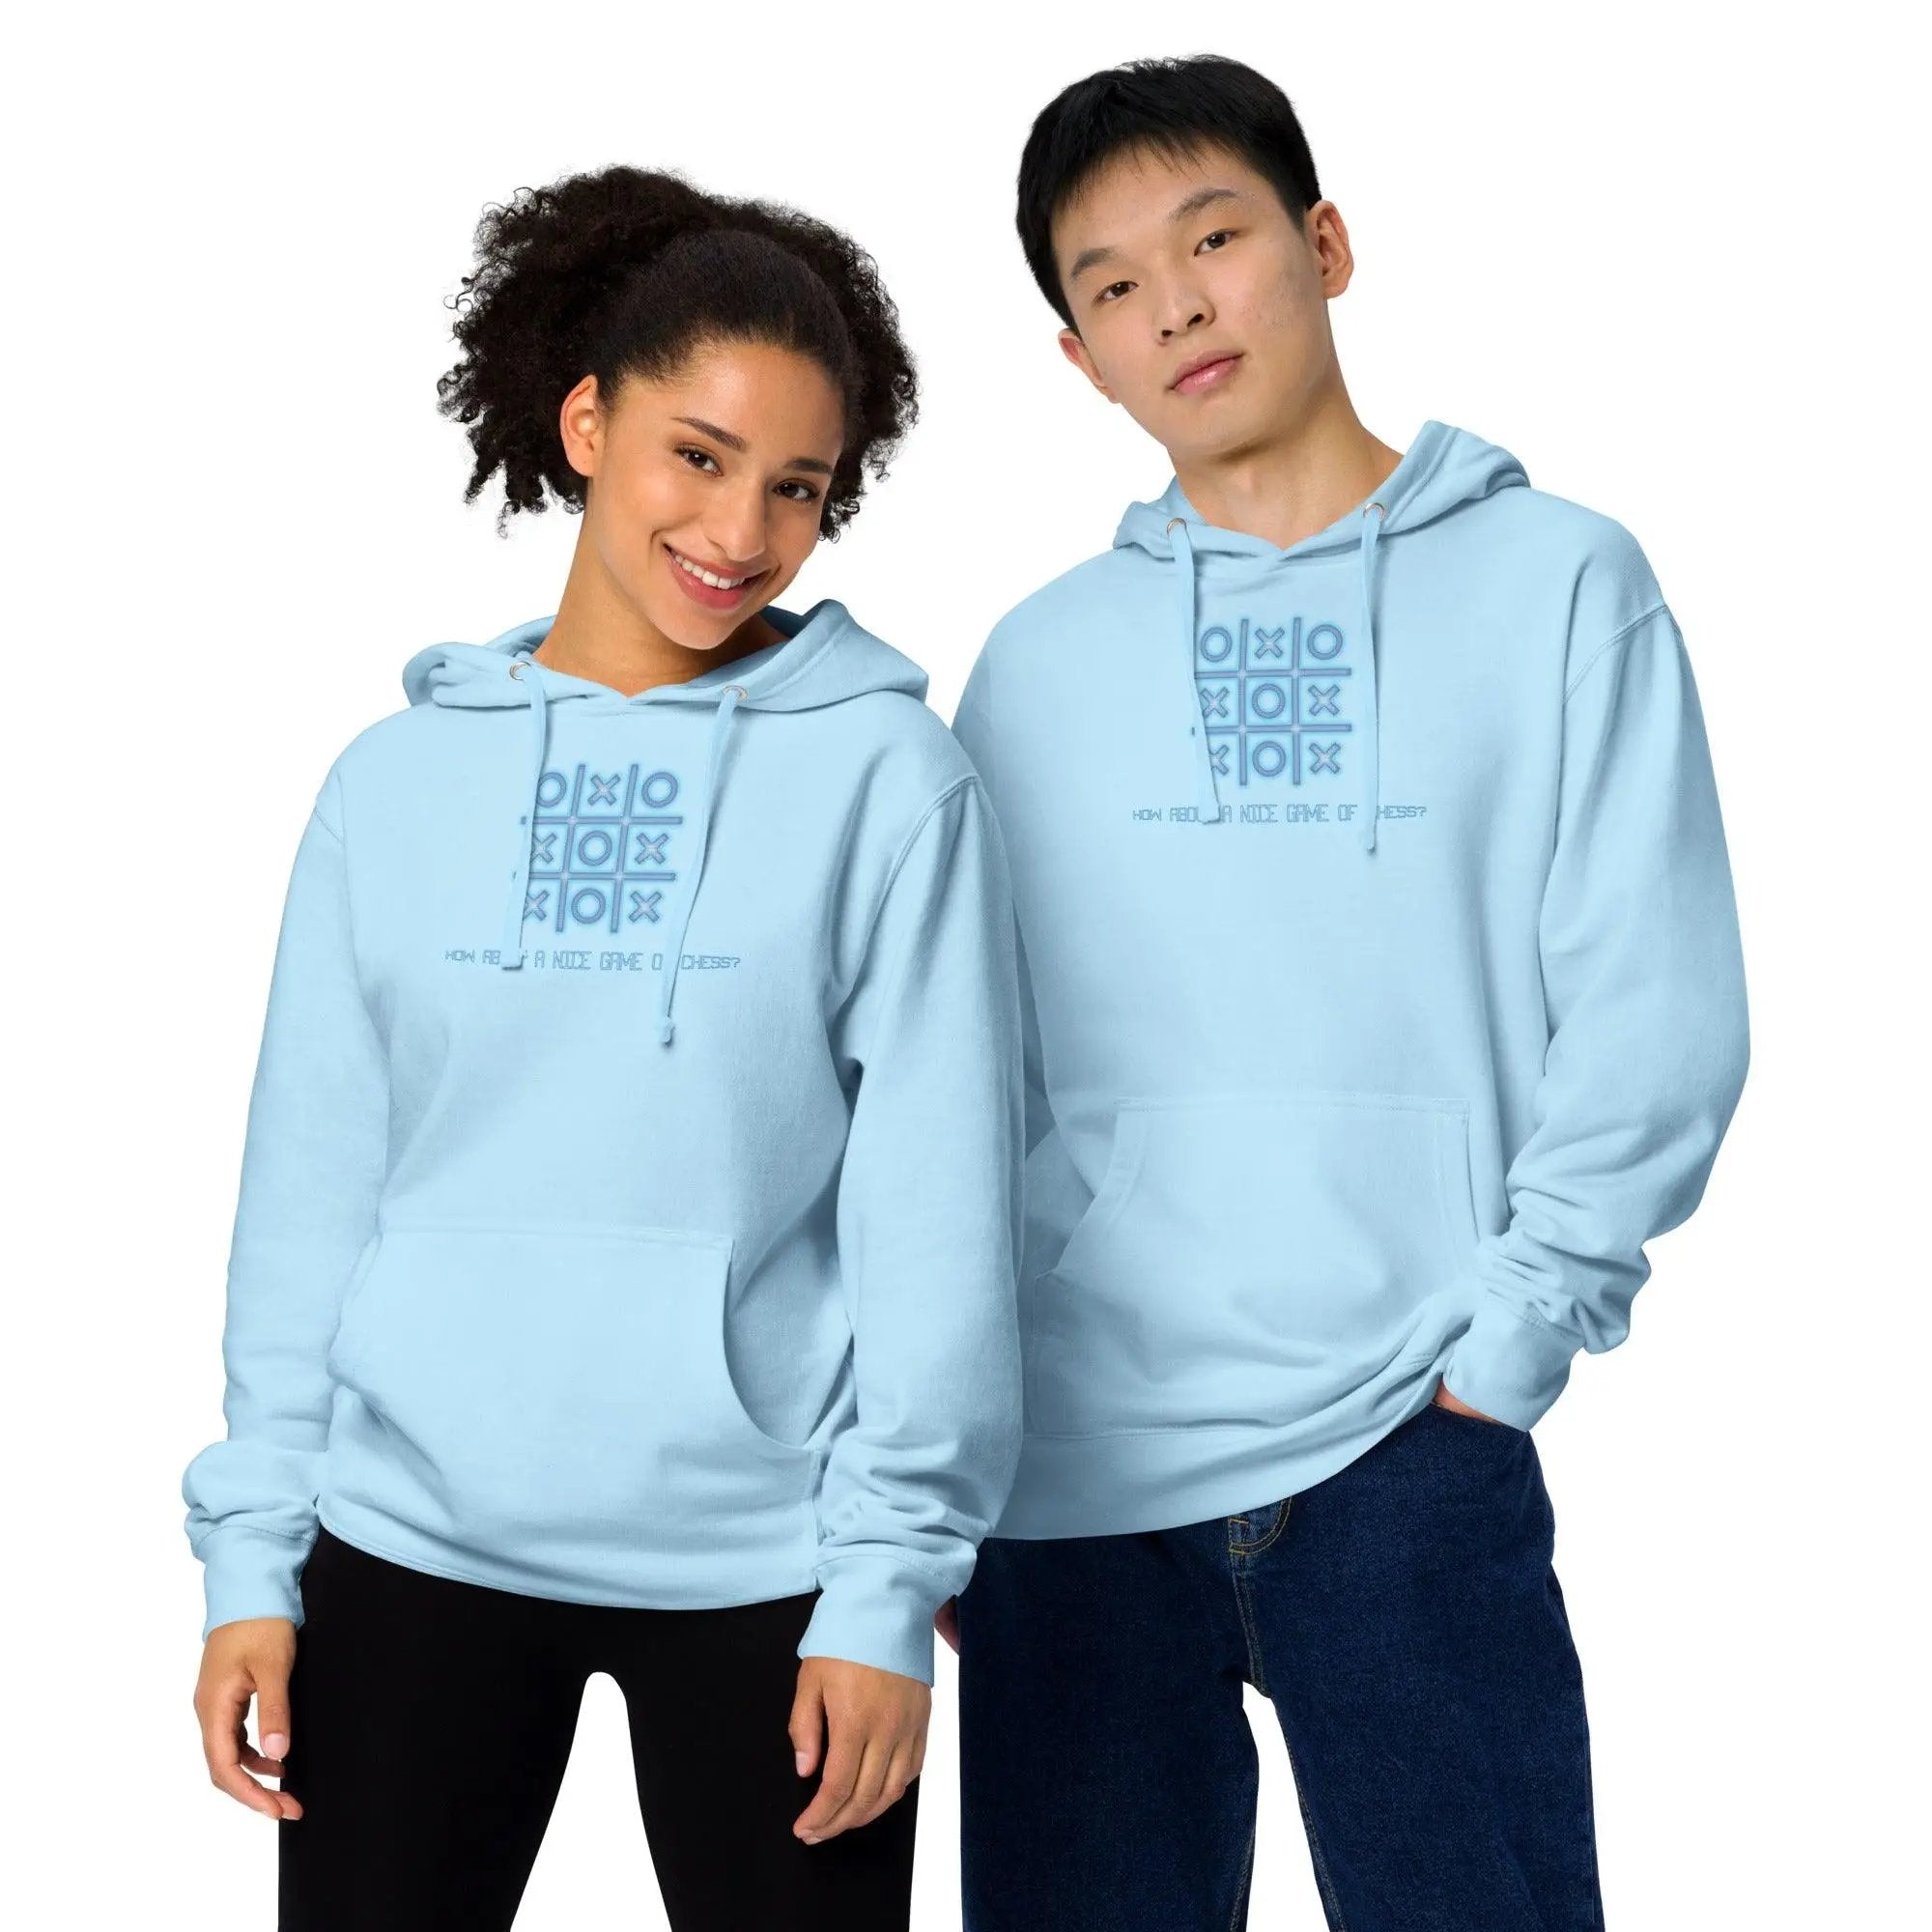 How About a Nice Game Of Chess? Unisex Hoodie